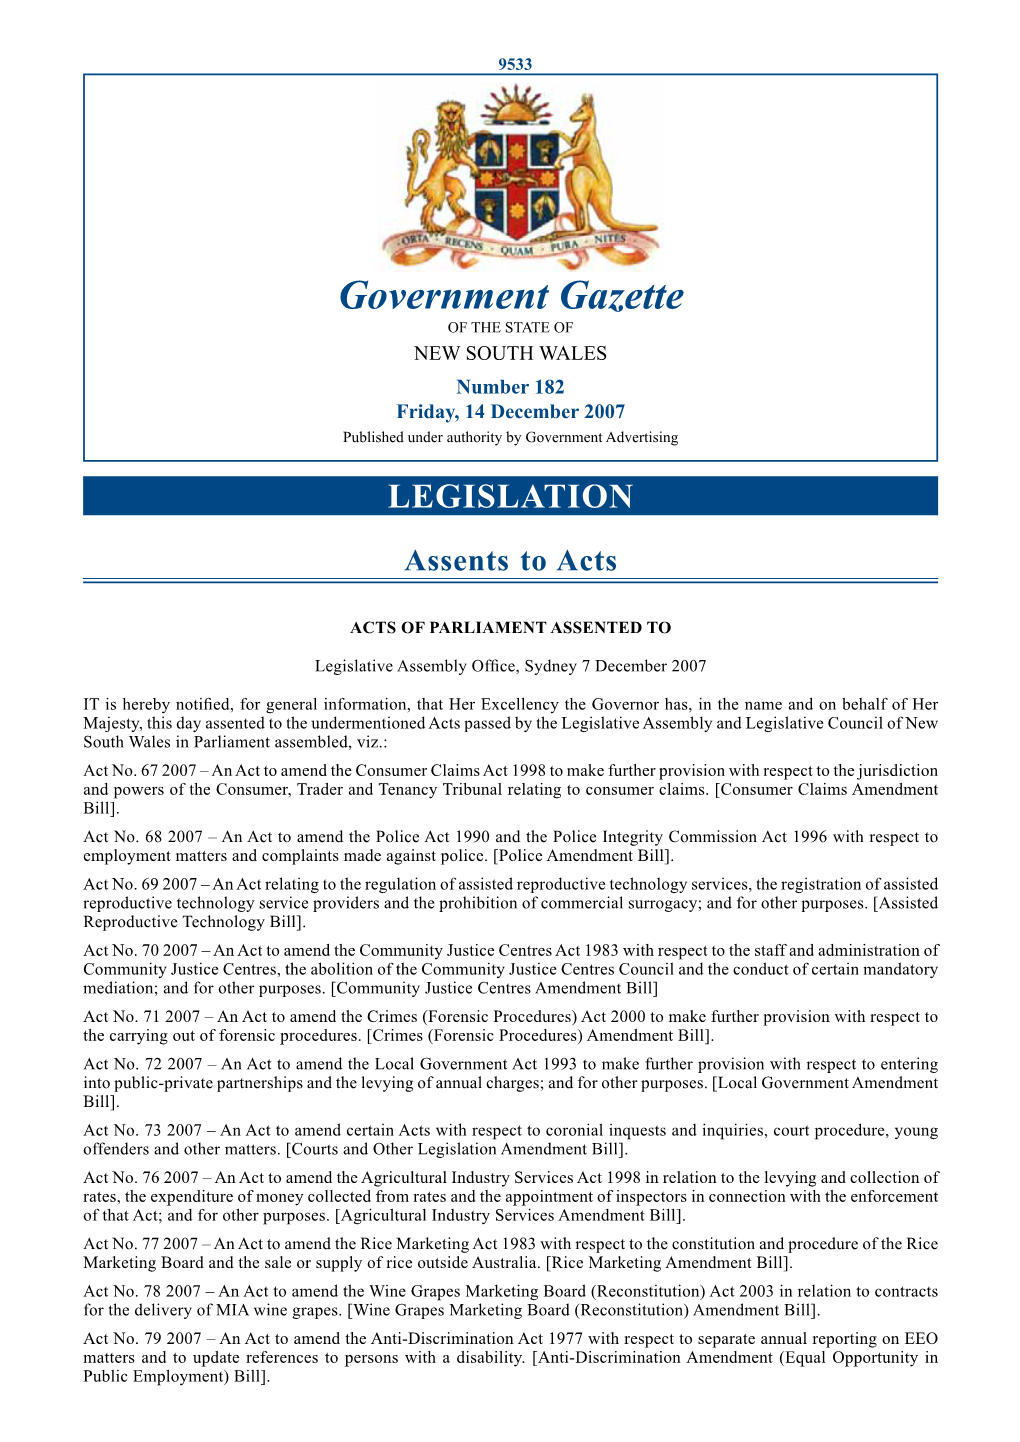 Government Gazette of the STATE of NEW SOUTH WALES Number 182 Friday, 14 December 2007 Published Under Authority by Government Advertising